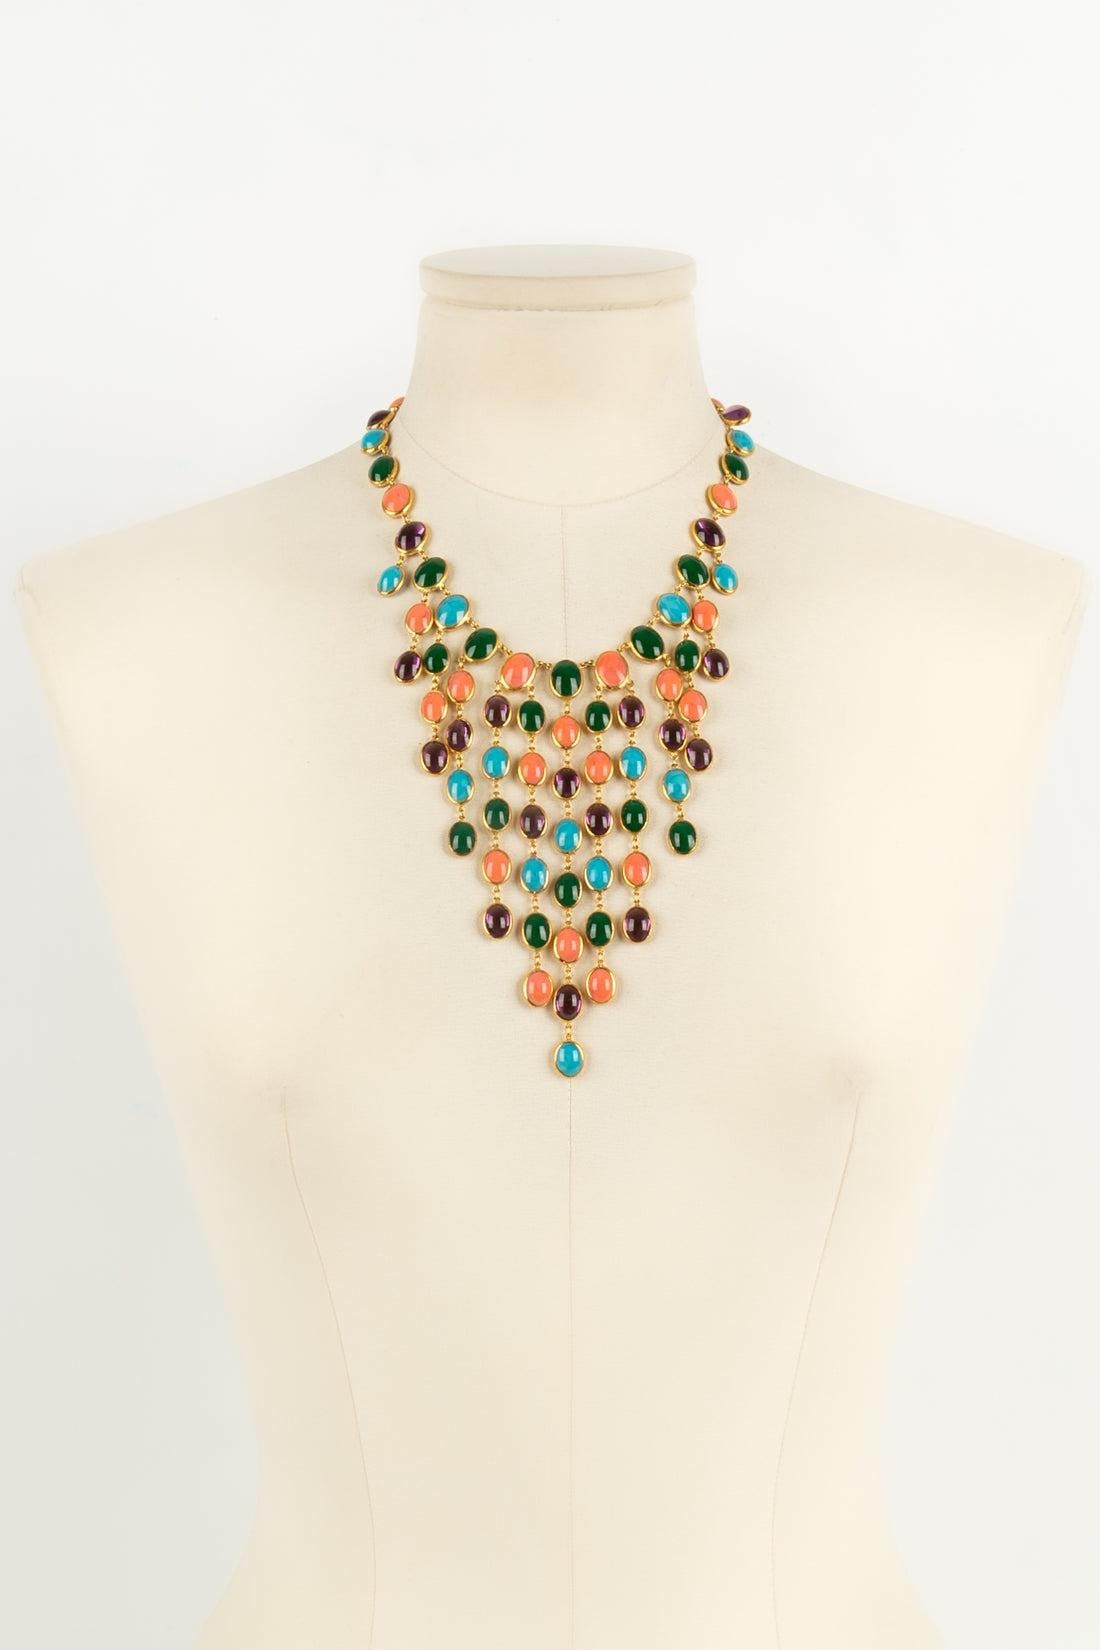 Gripoix - Gold plated metal and multicolor glass paste necklace

Additional information:
Condition: Very good condition
Dimensions: Length: 42 cm

Seller Reference: BC65